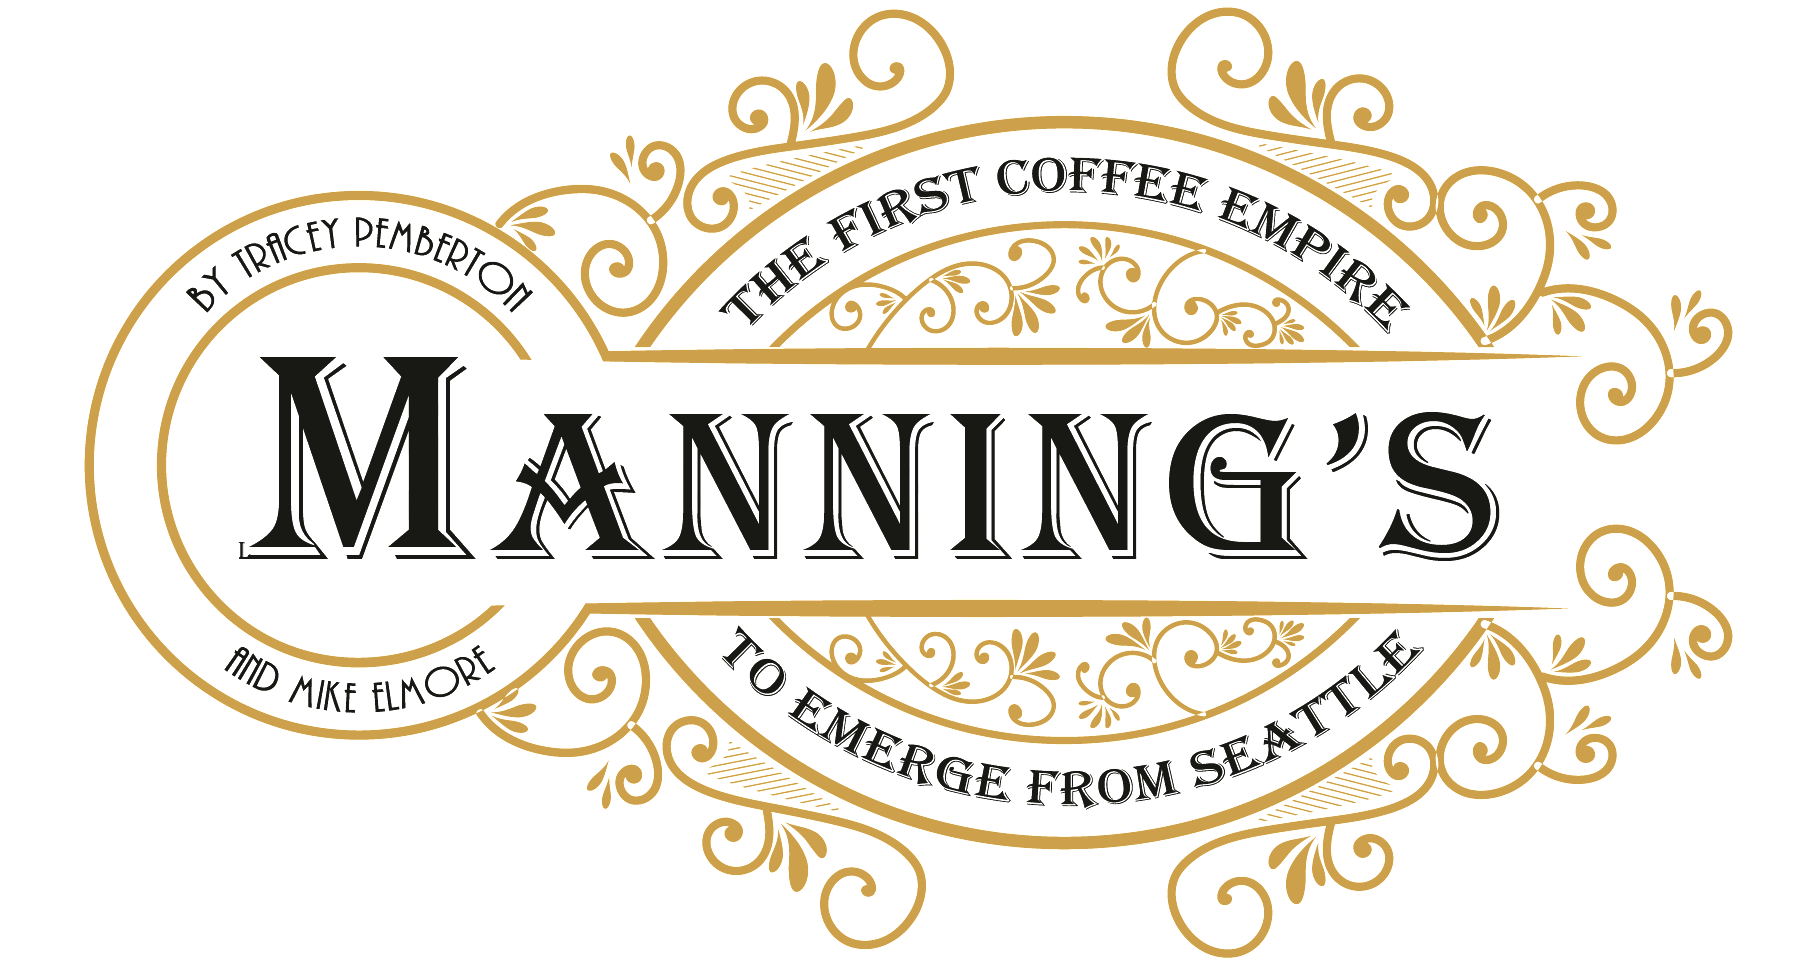 Manning’s - The First Coffee Empire to Emerge from Seattle